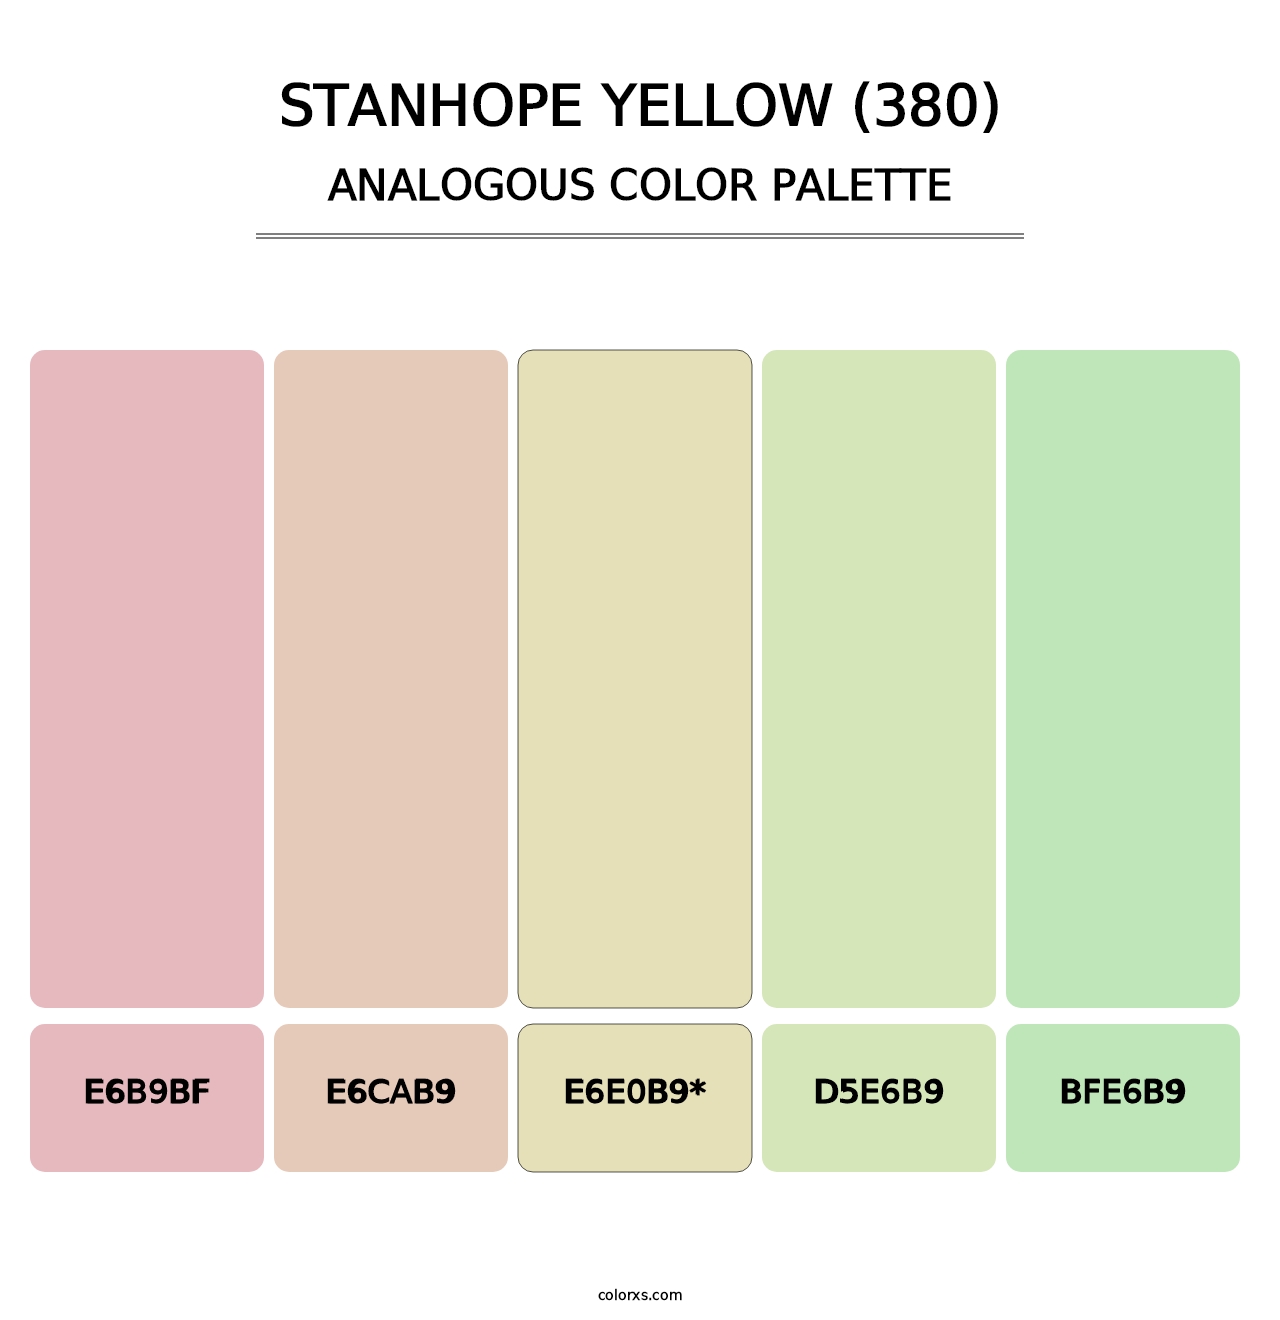 Stanhope Yellow (380) - Analogous Color Palette